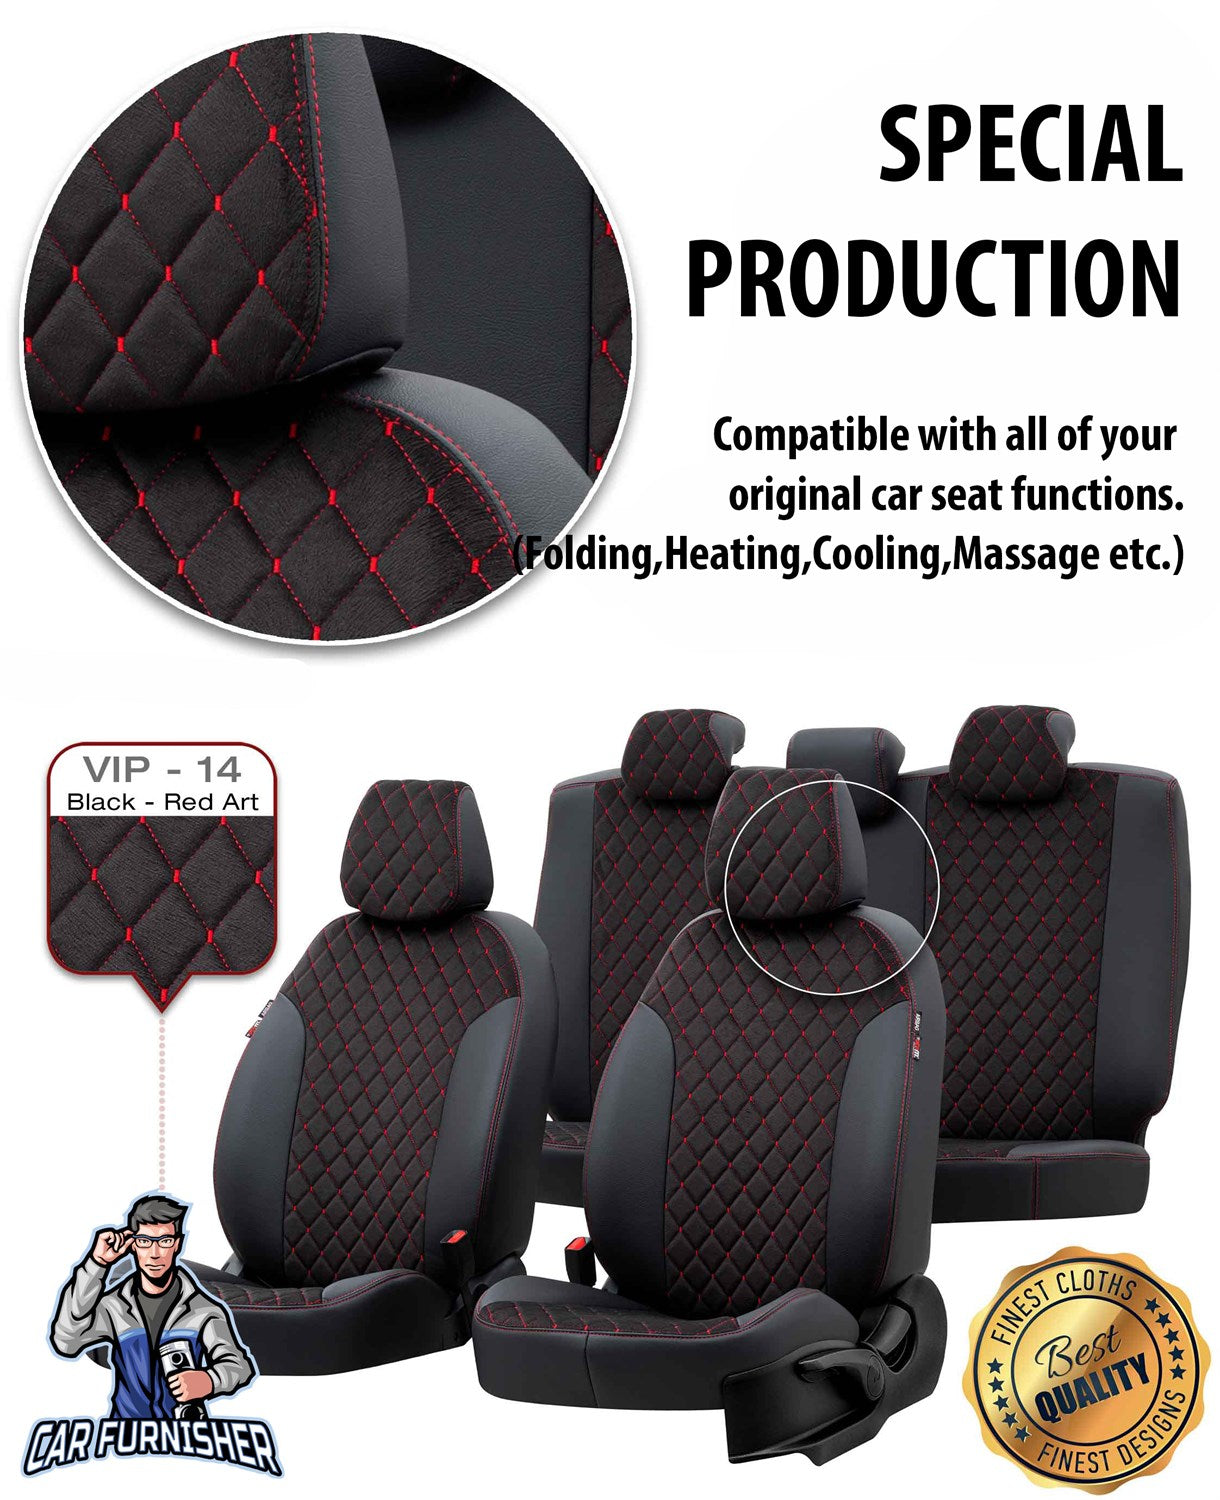 Mercedes S Class Seat Covers Madrid Foal Feather Design Dark Gray Leather & Foal Feather